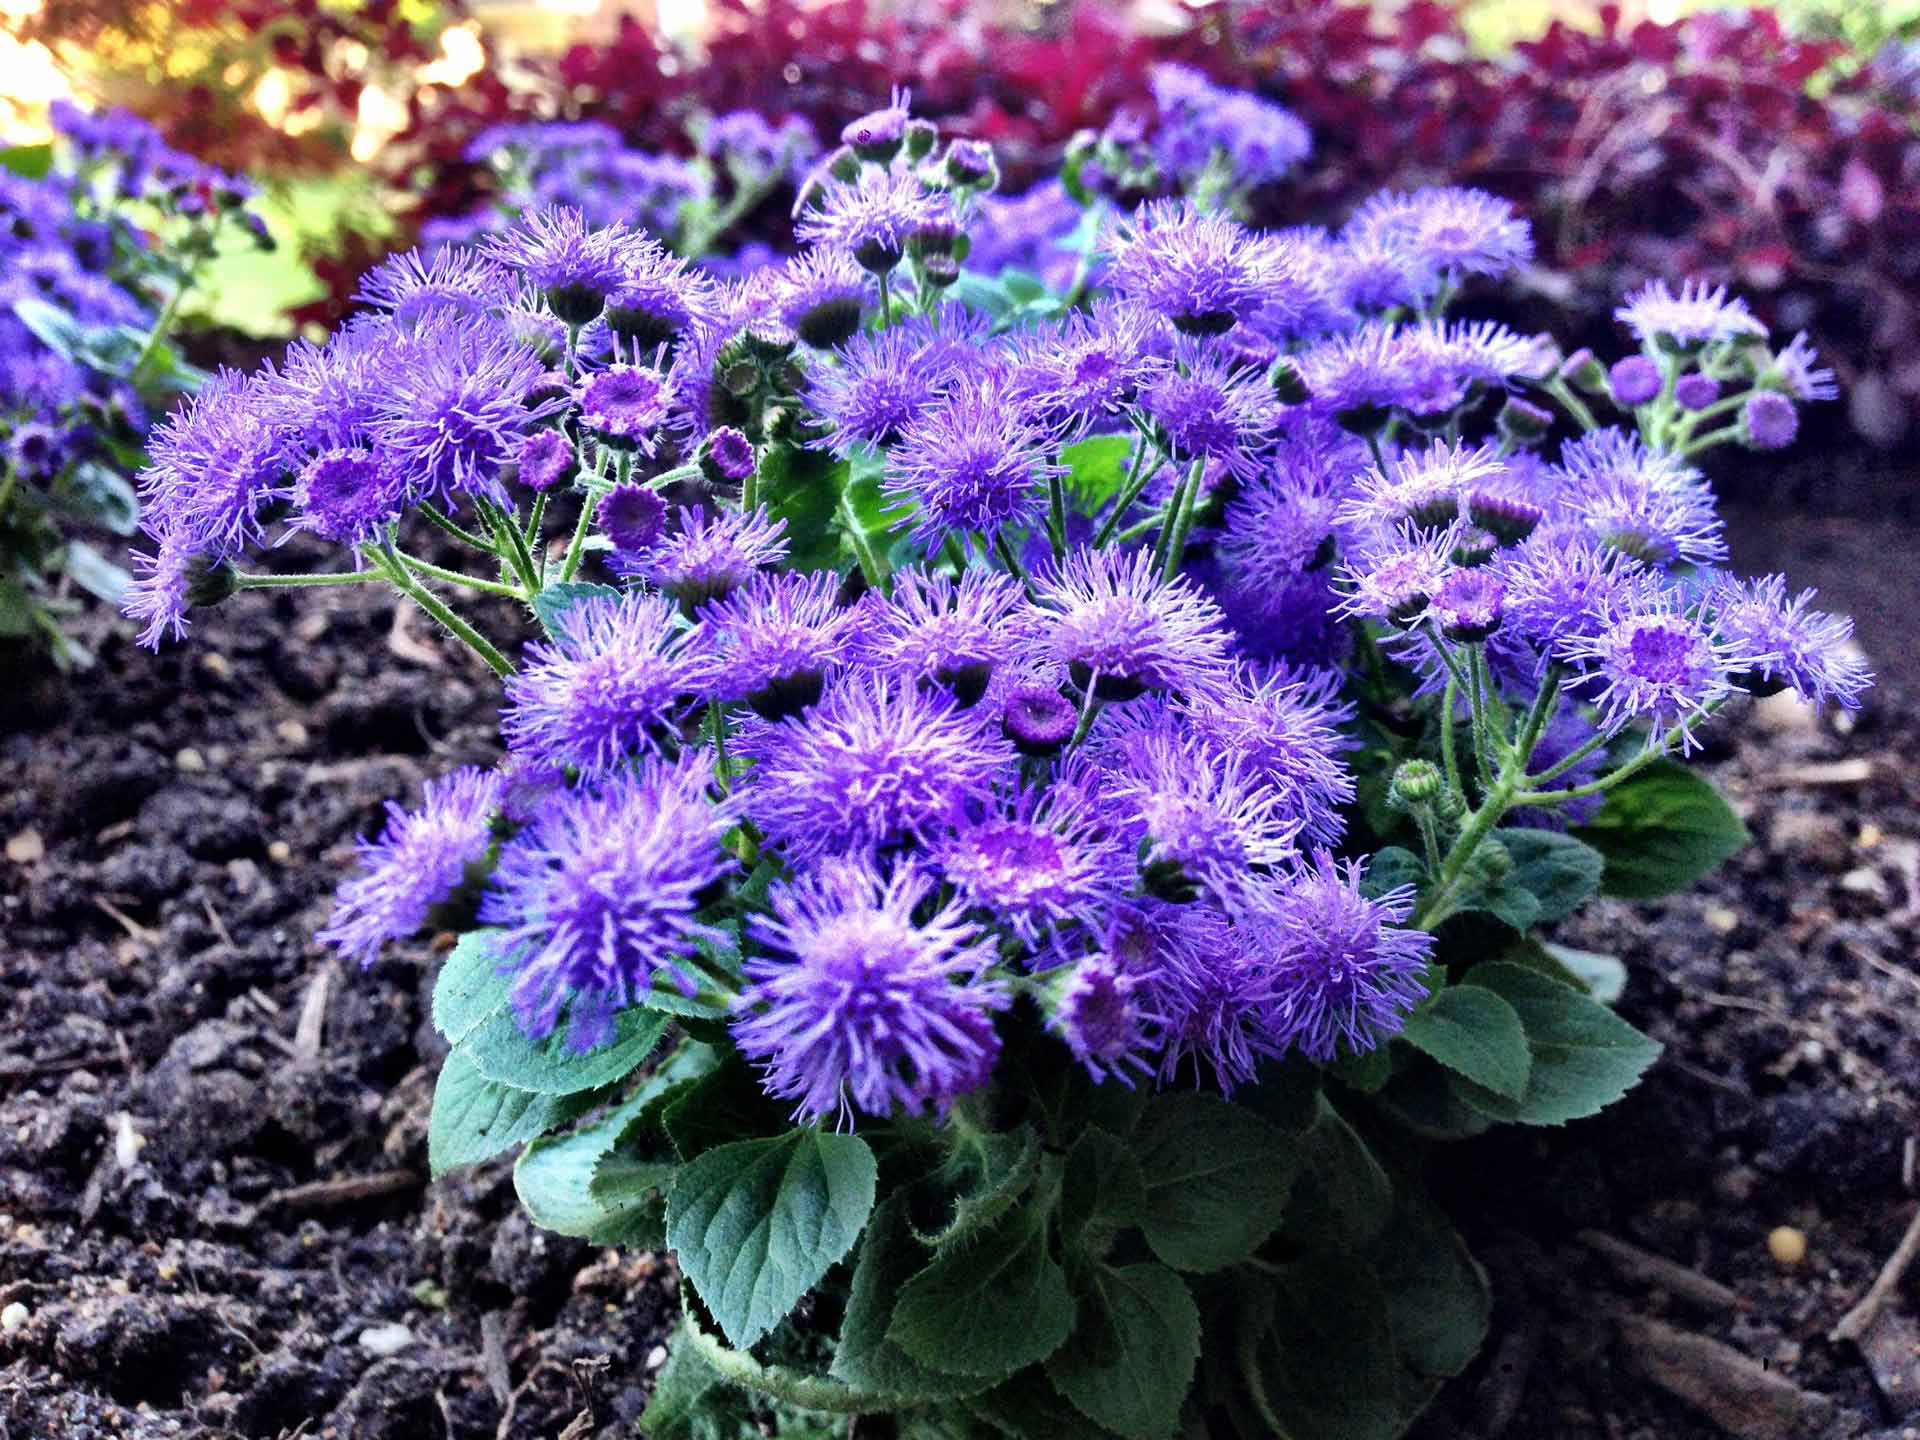 Bright purple flowers blooming in a newly renovated landscape bed near Memphis, TN.